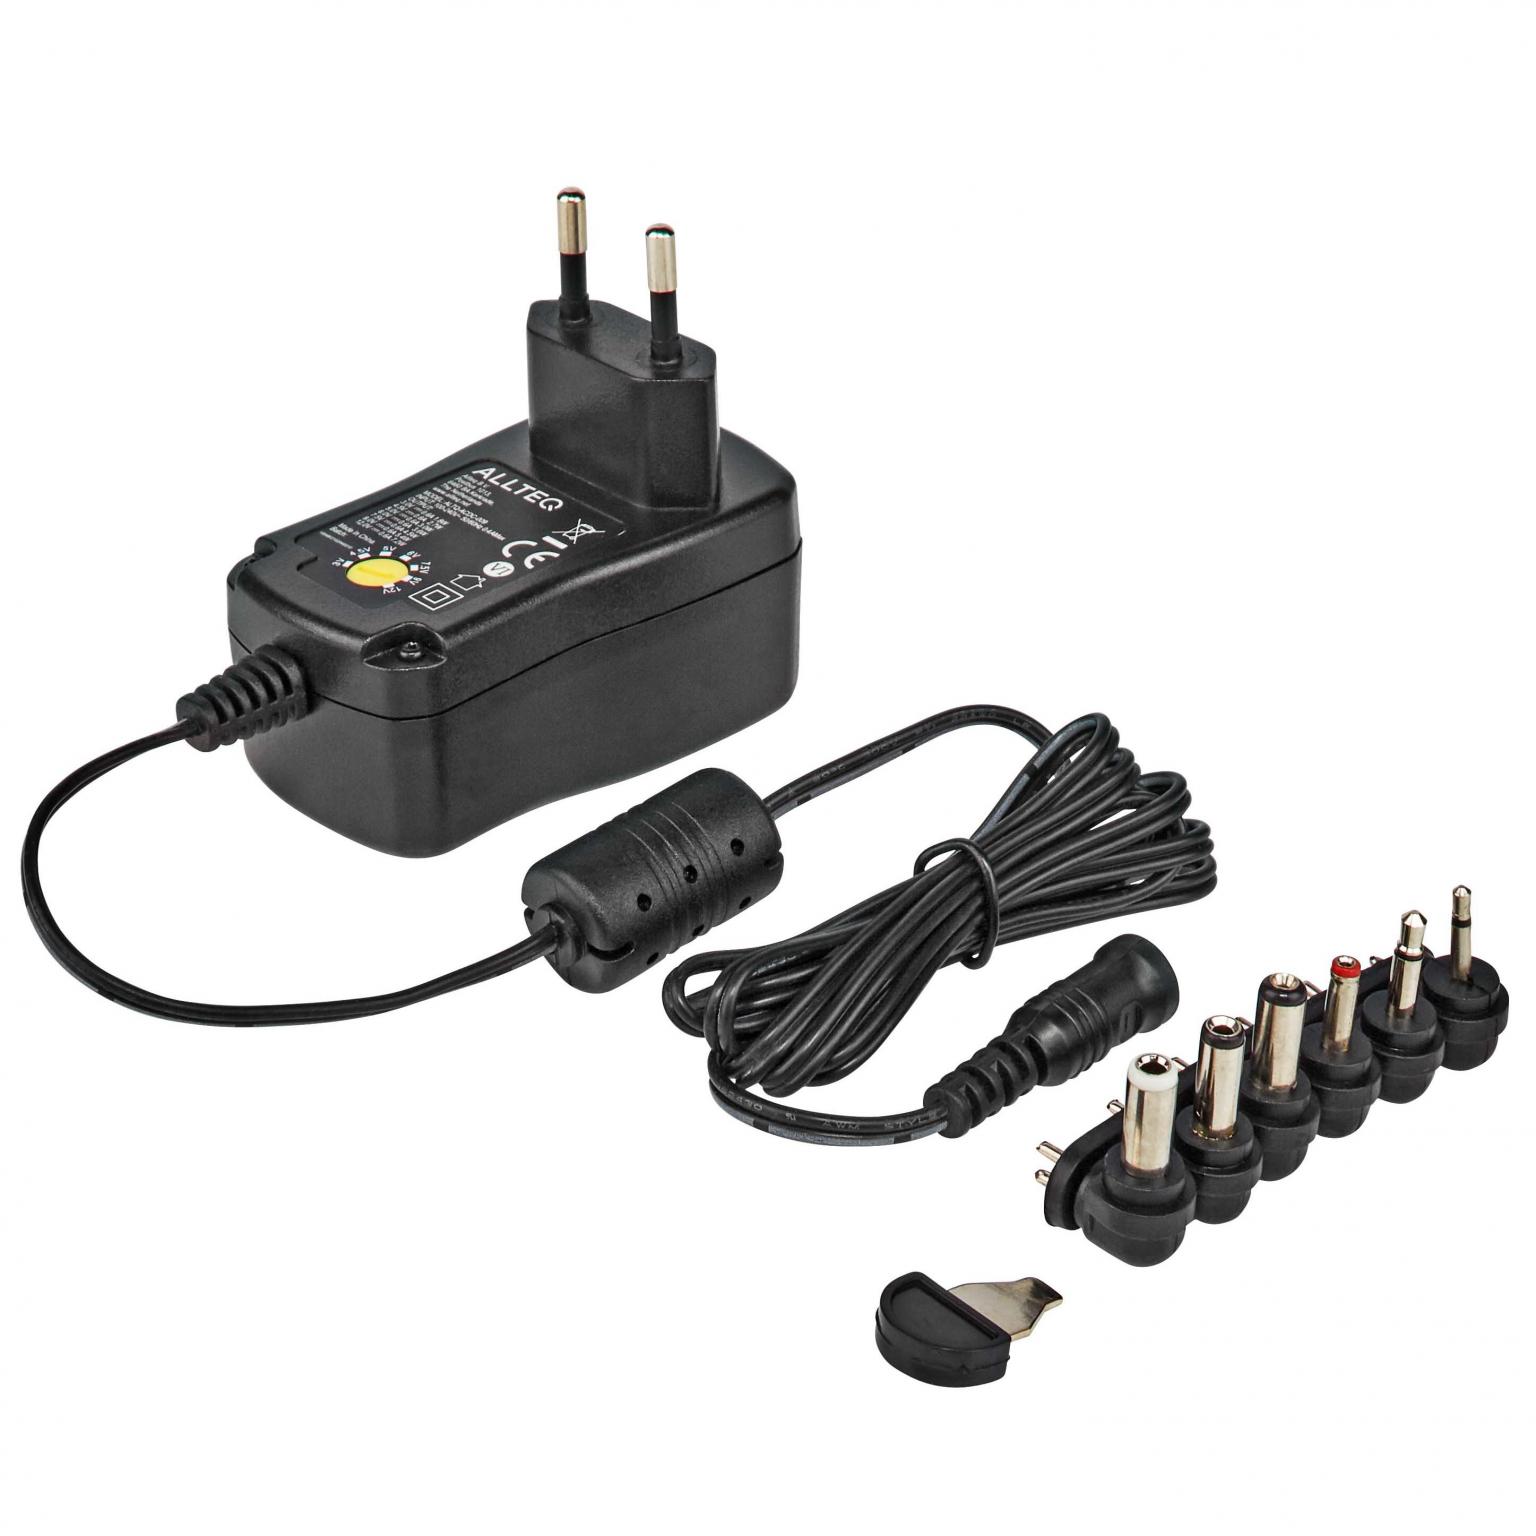 Universele AC/DC adapter - Allteq